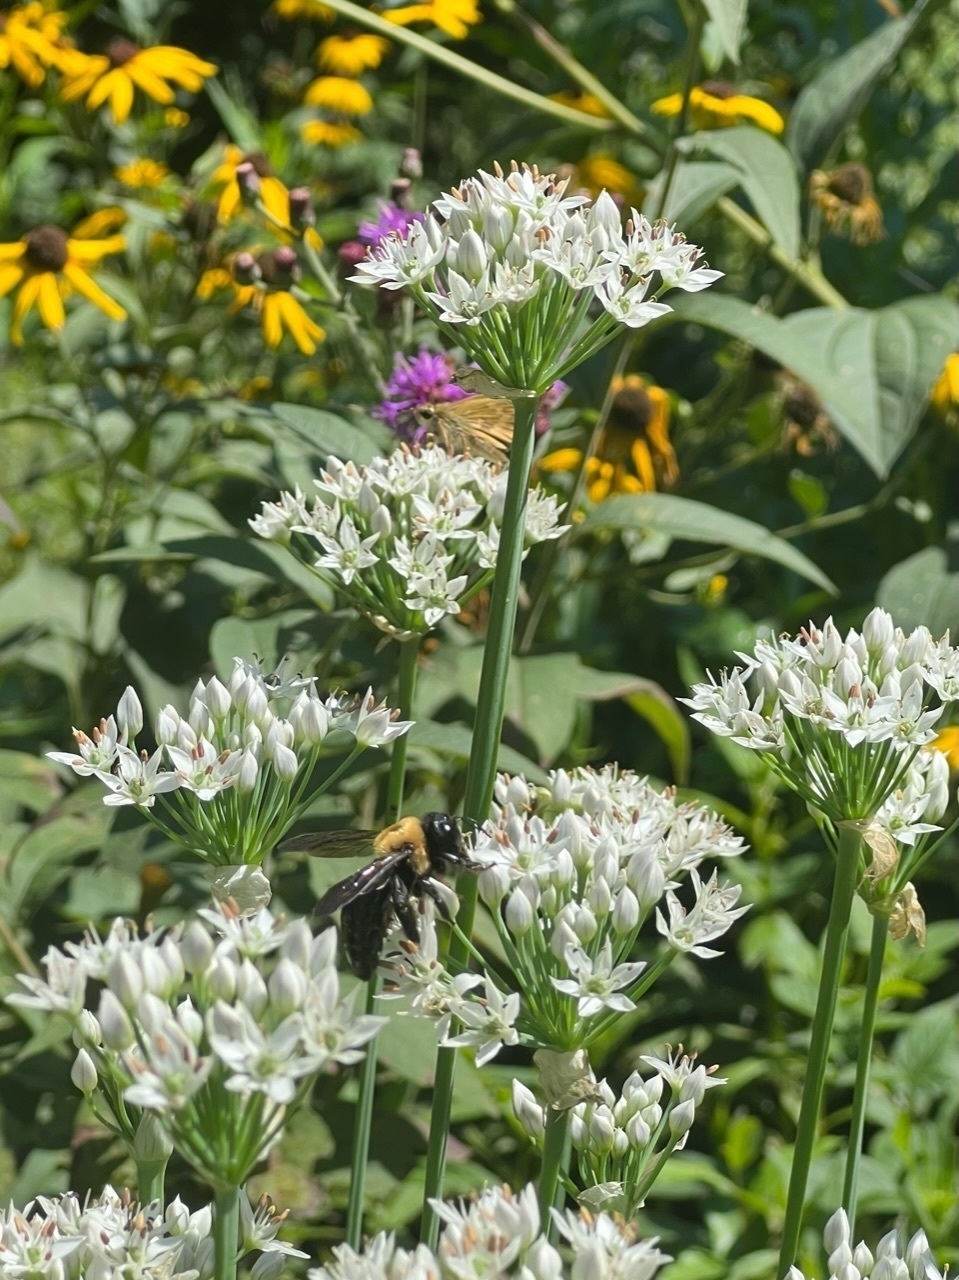 A bumblebee feeds from white clusters of small flowers. Yellow and purple flowers in the background.